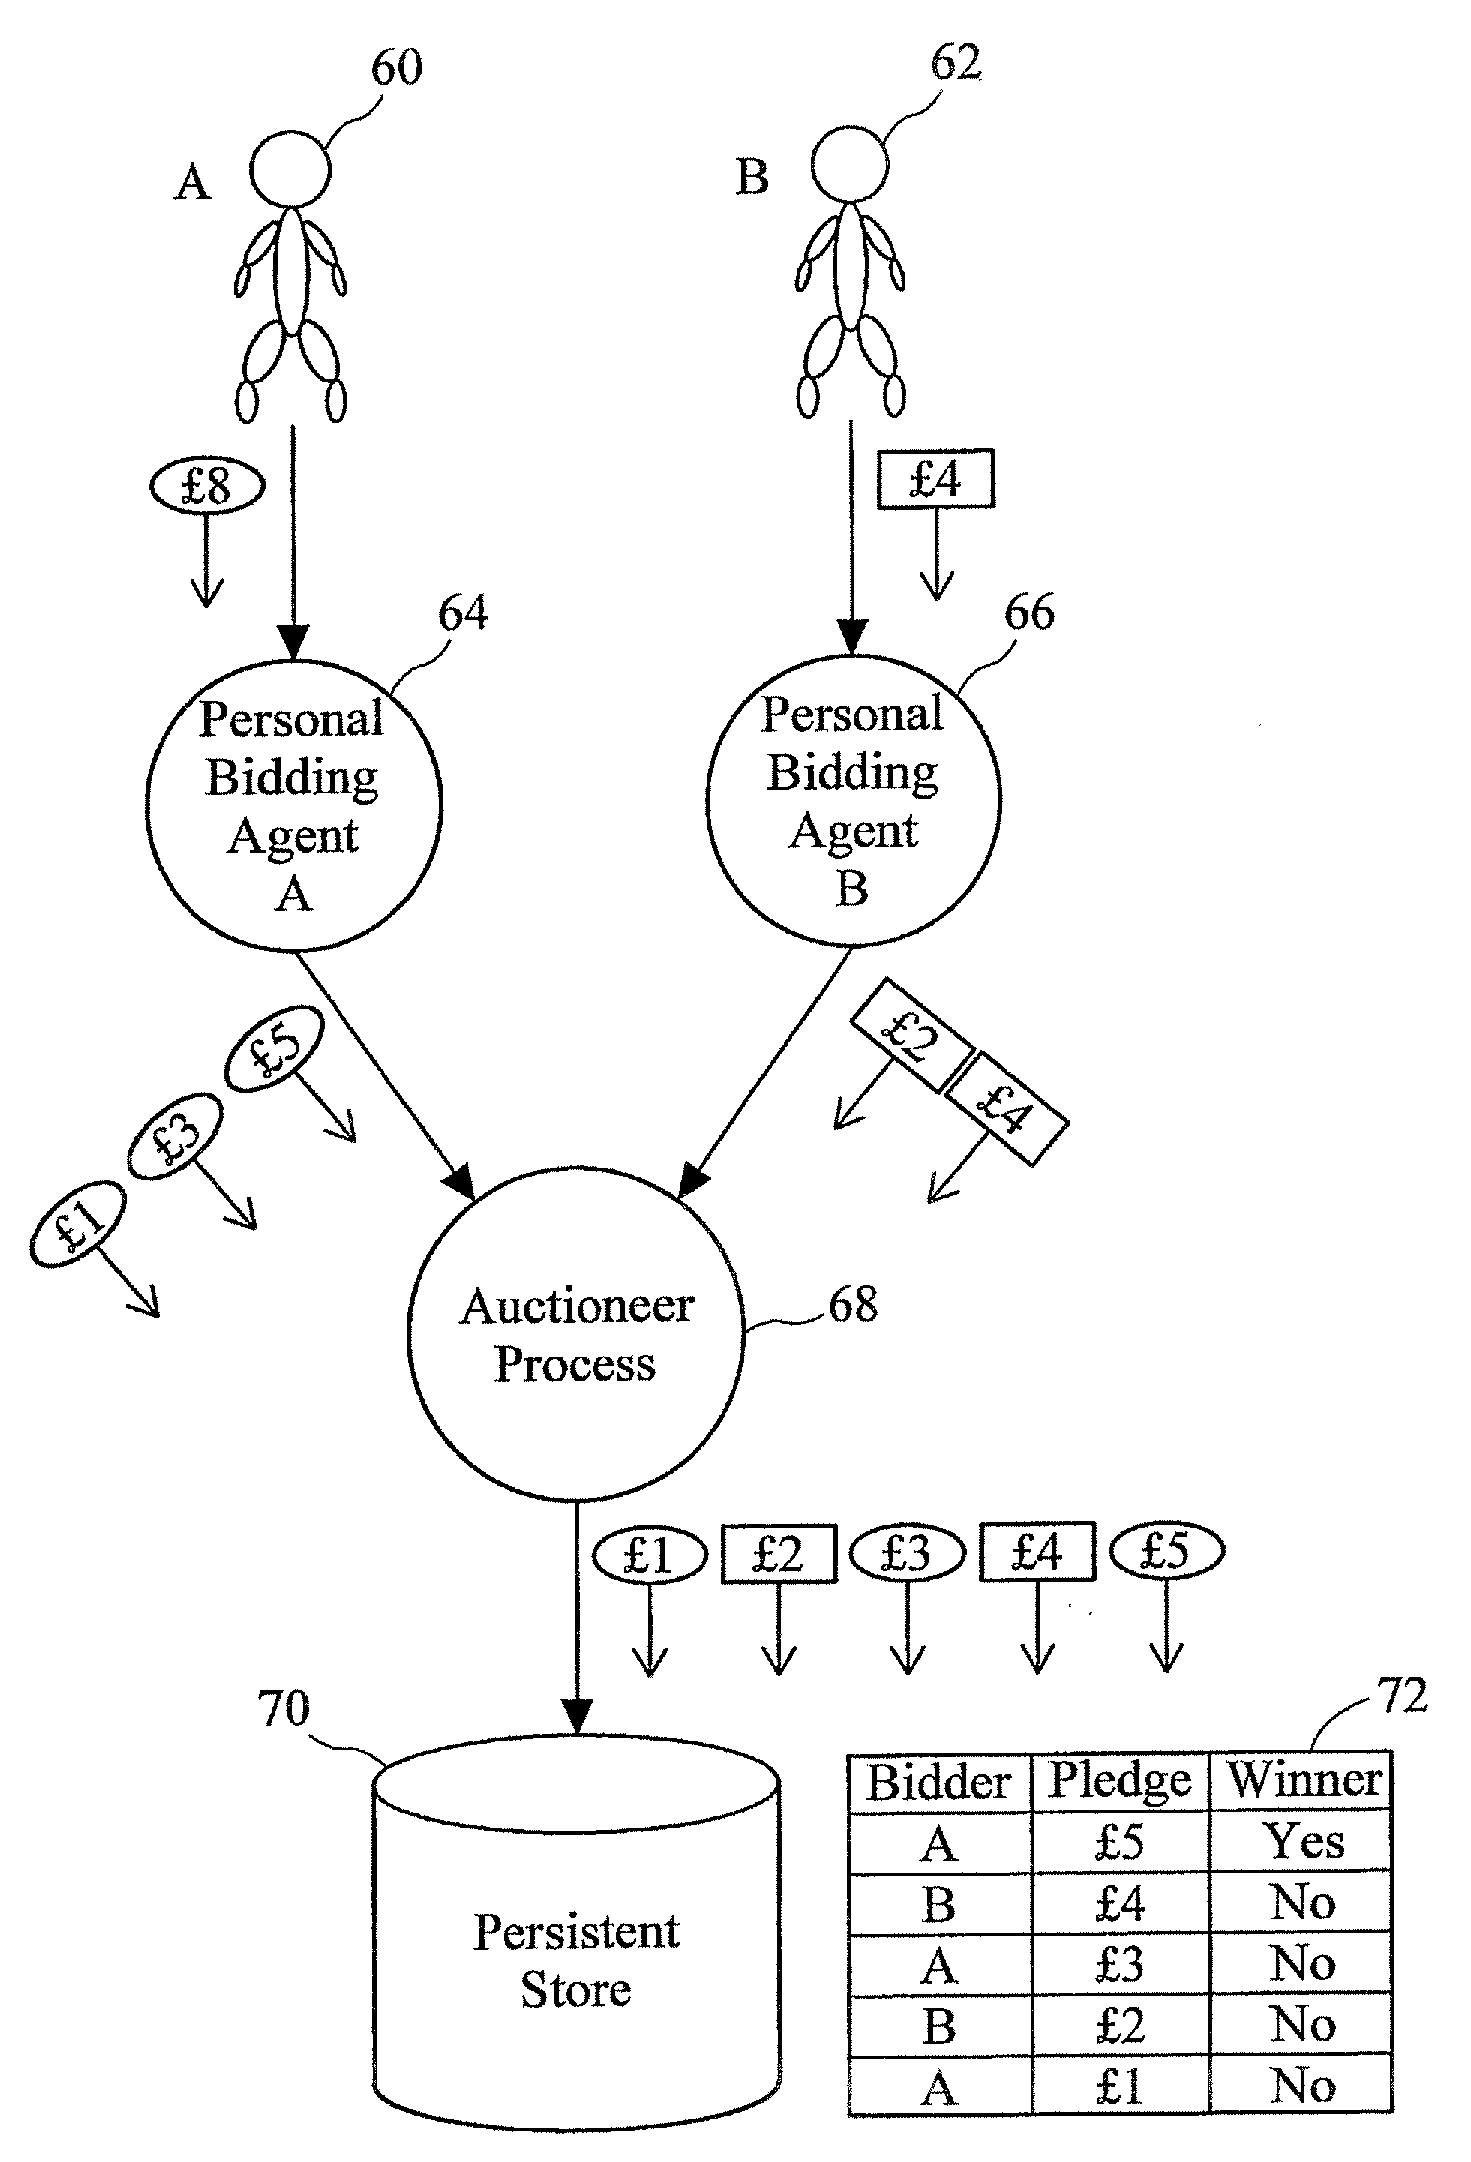 Data processing system and method